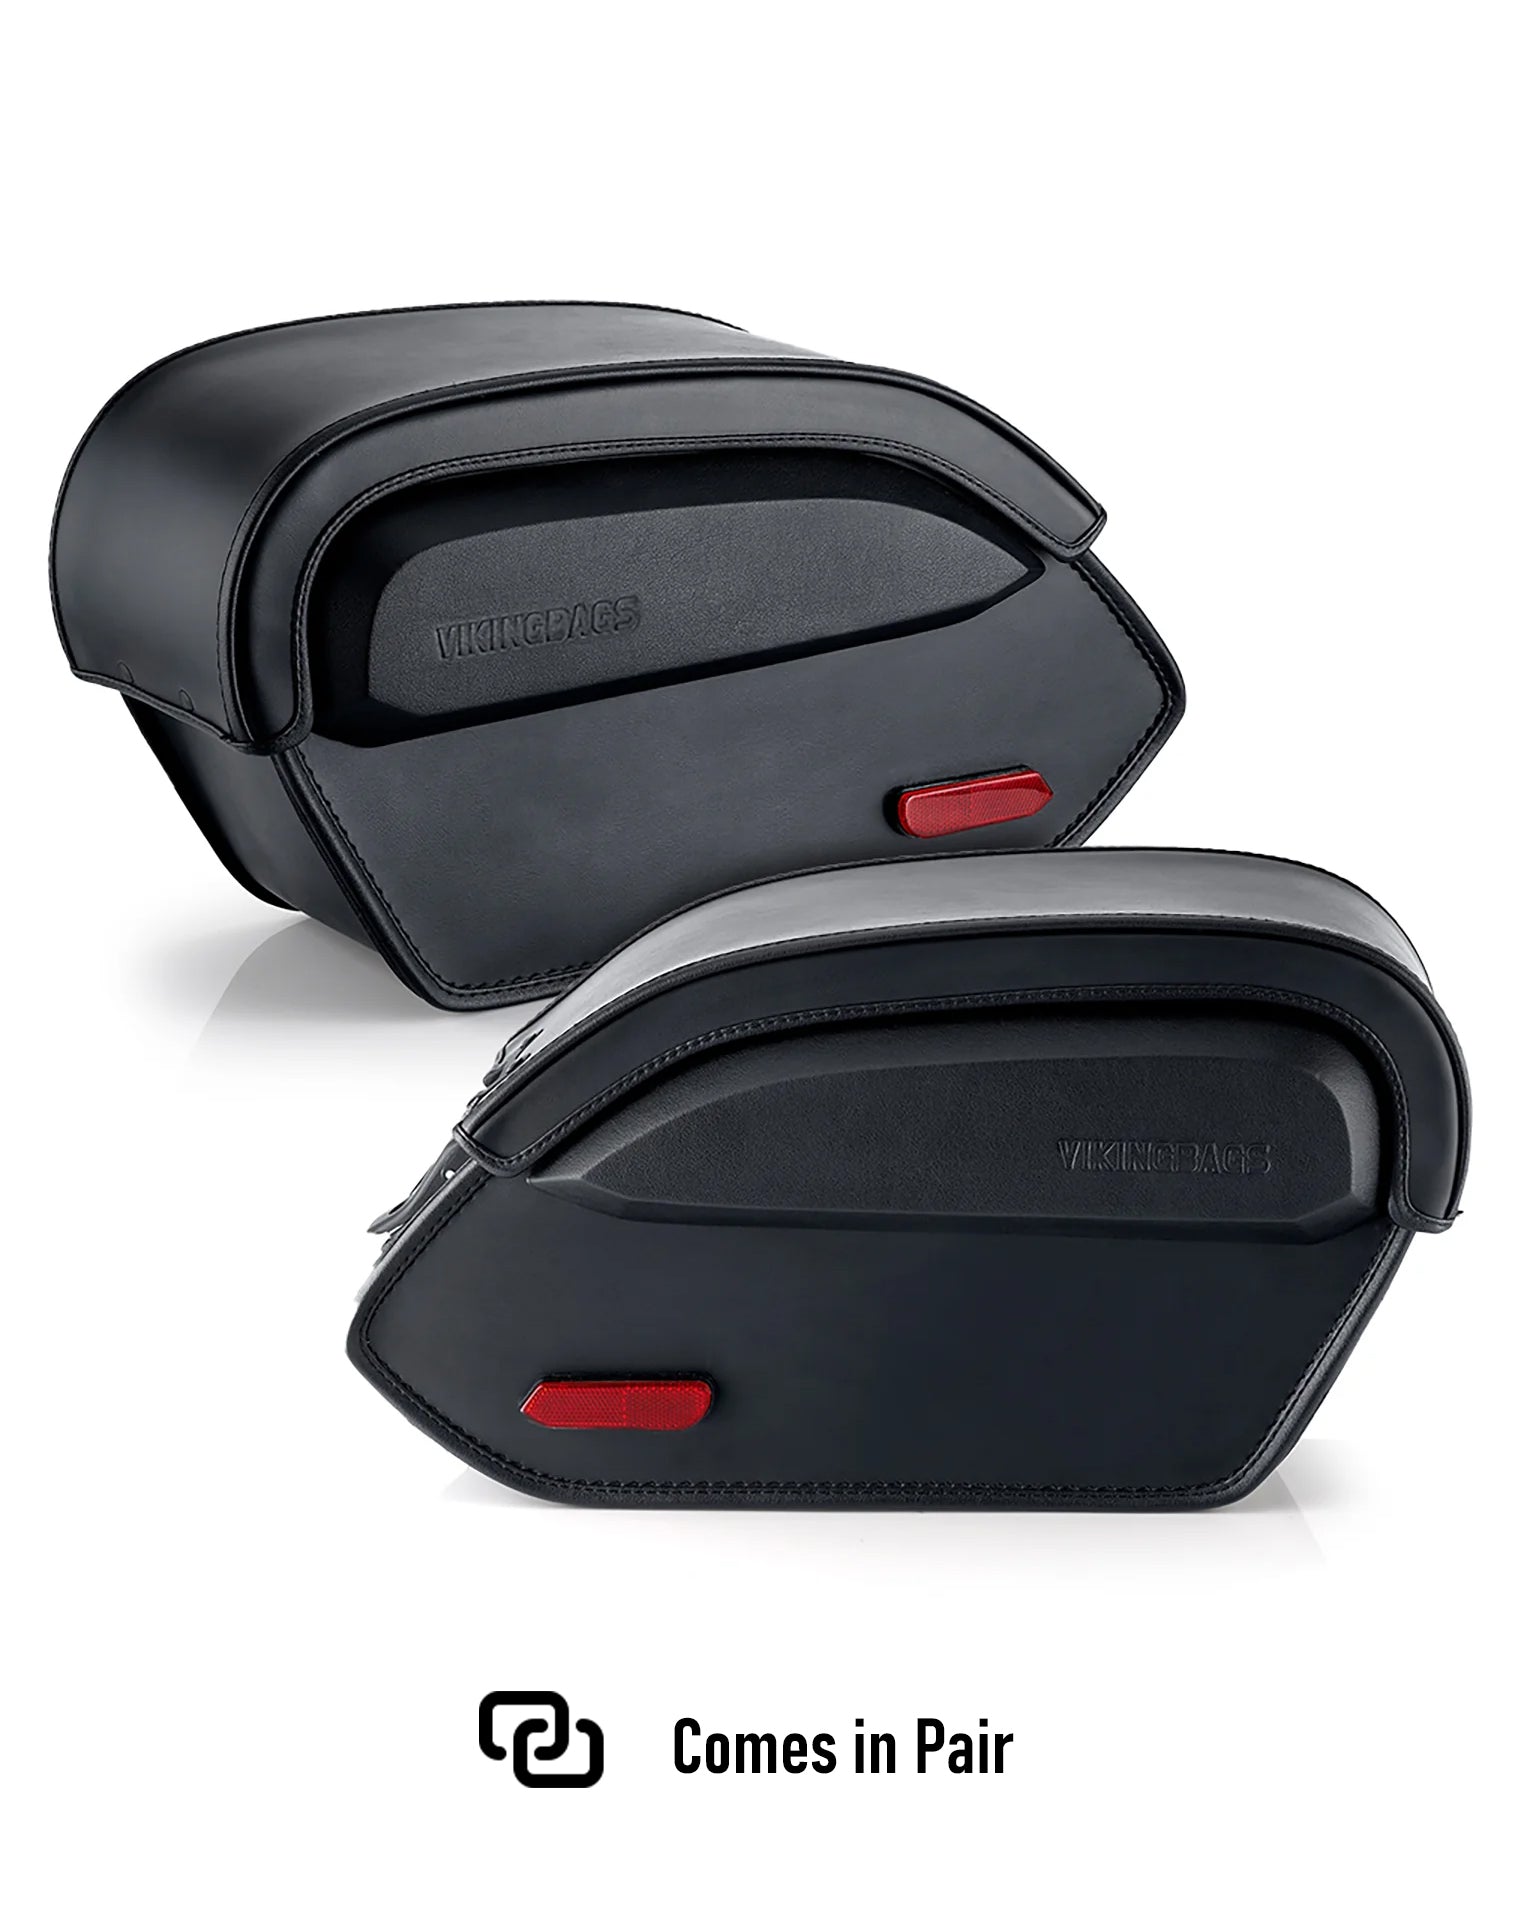 Viking Aviator Large Suzuki Intruder 1500 Vl1500 Leather Motorcycle Saddlebags Weather Resistant Bags Comes in Pair